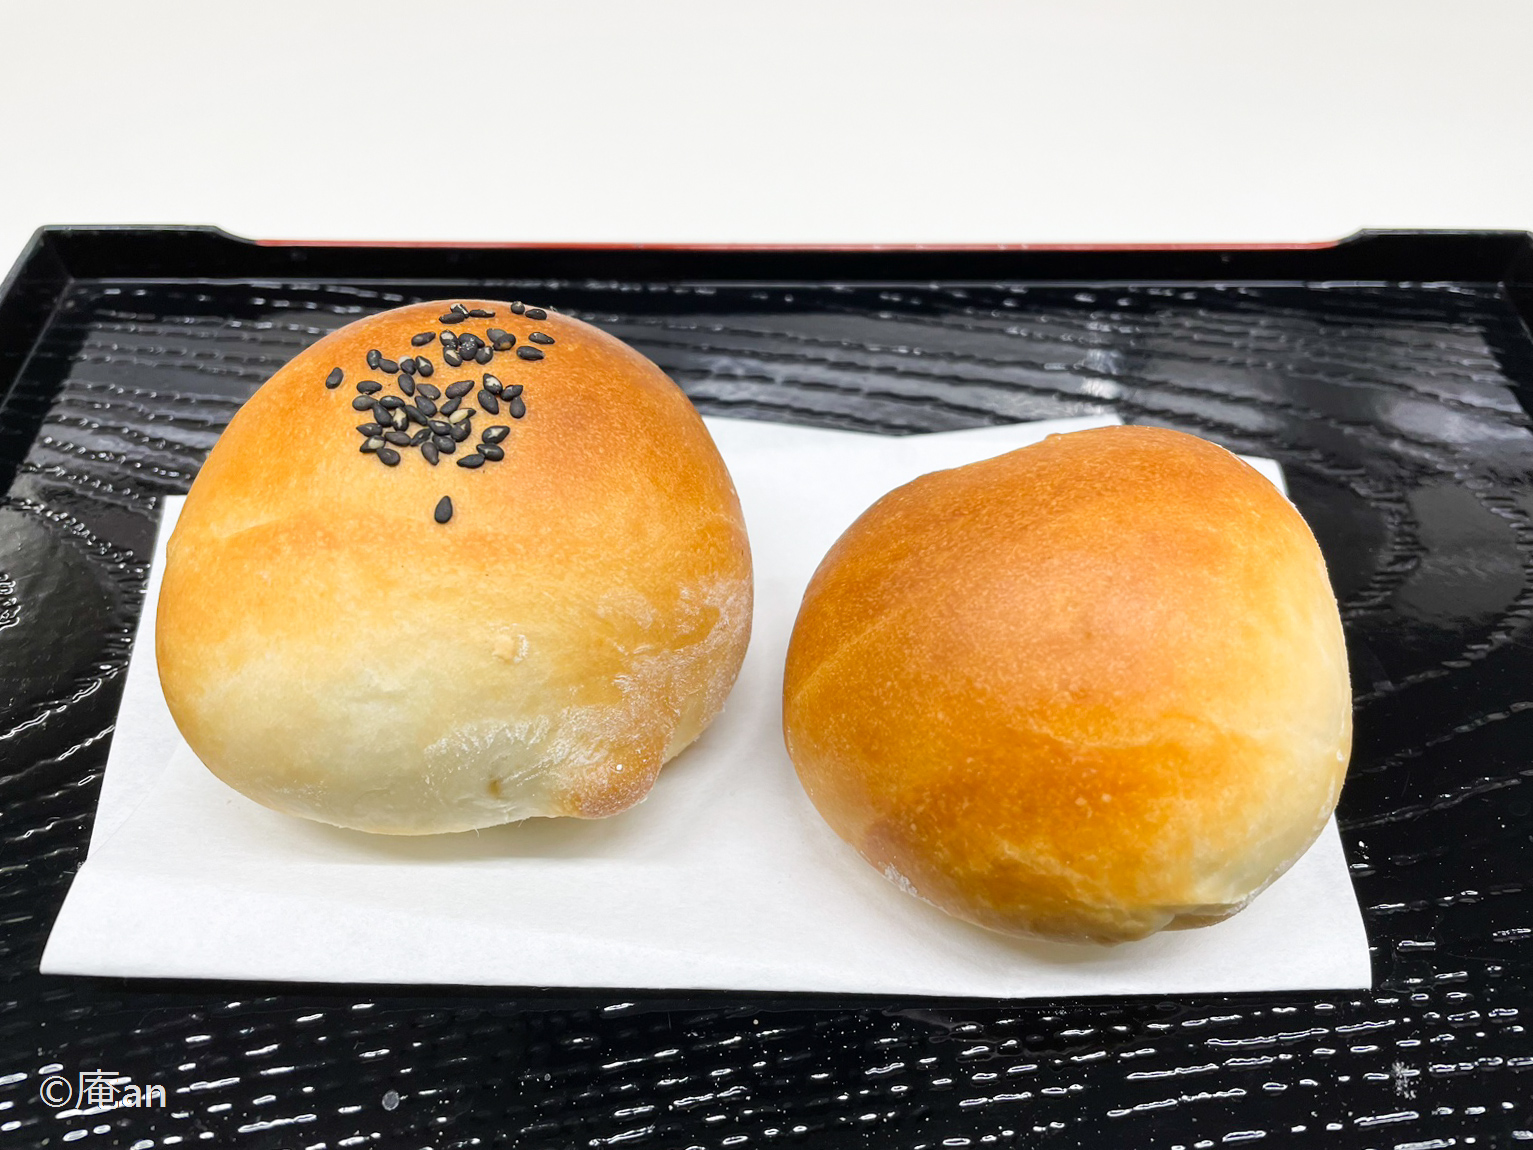 Anpan (sweet bean paste bread) making and Tea Ceremony experience